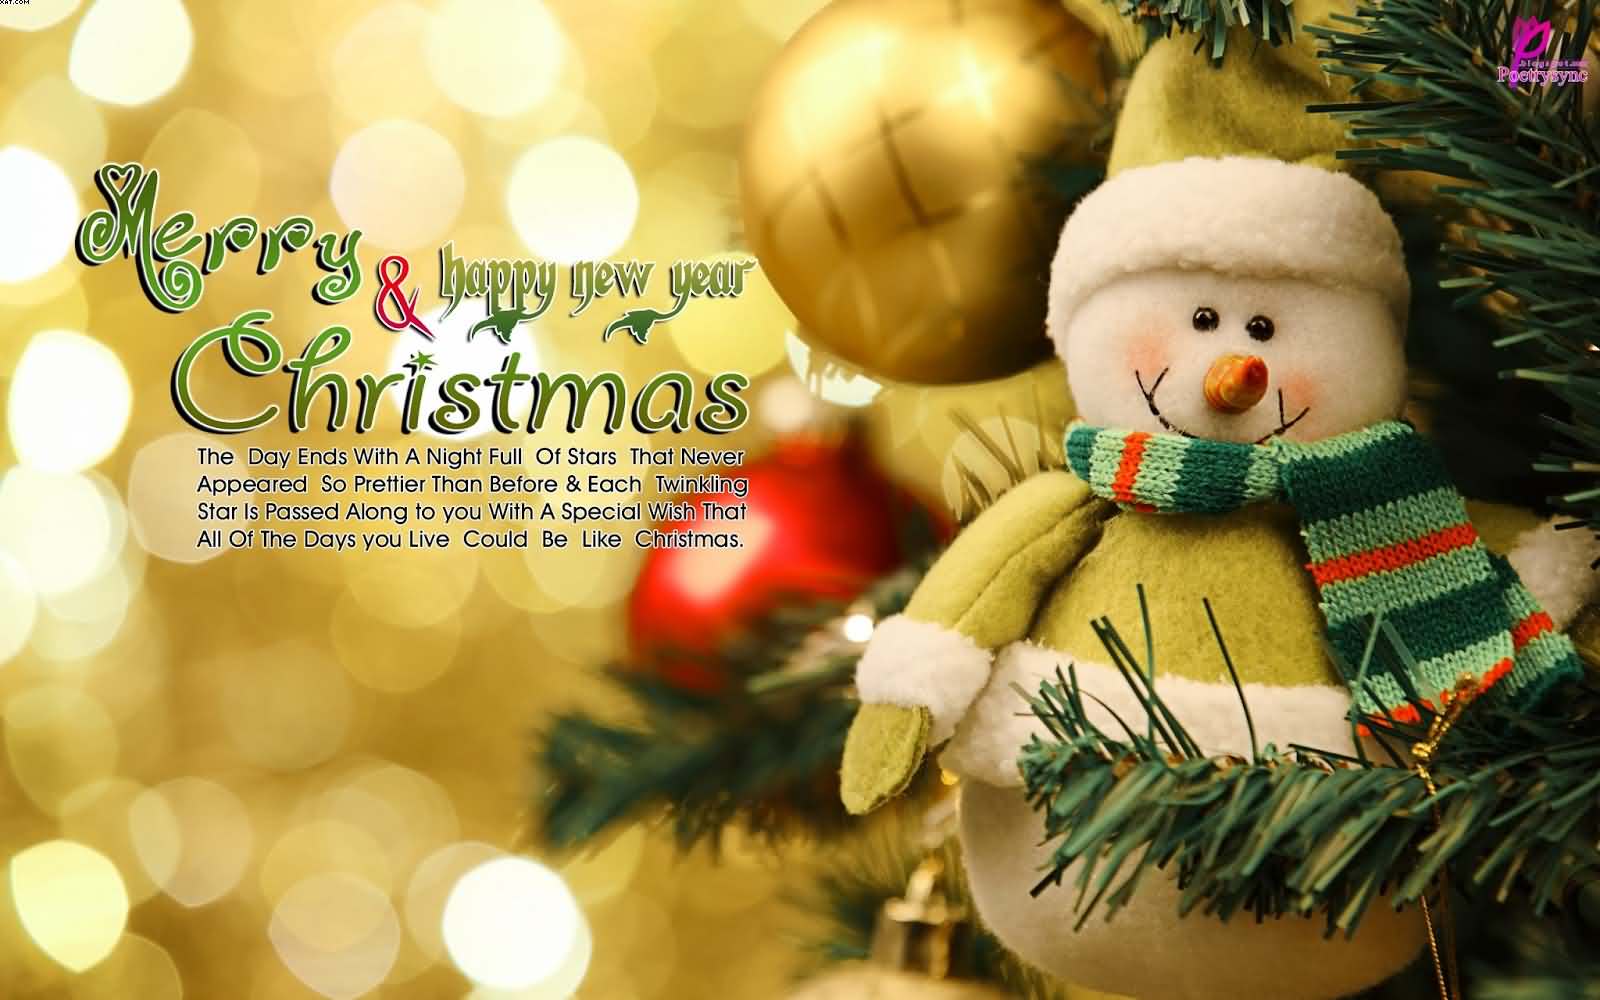 Merry Christmas and Happy New Year wishes photo